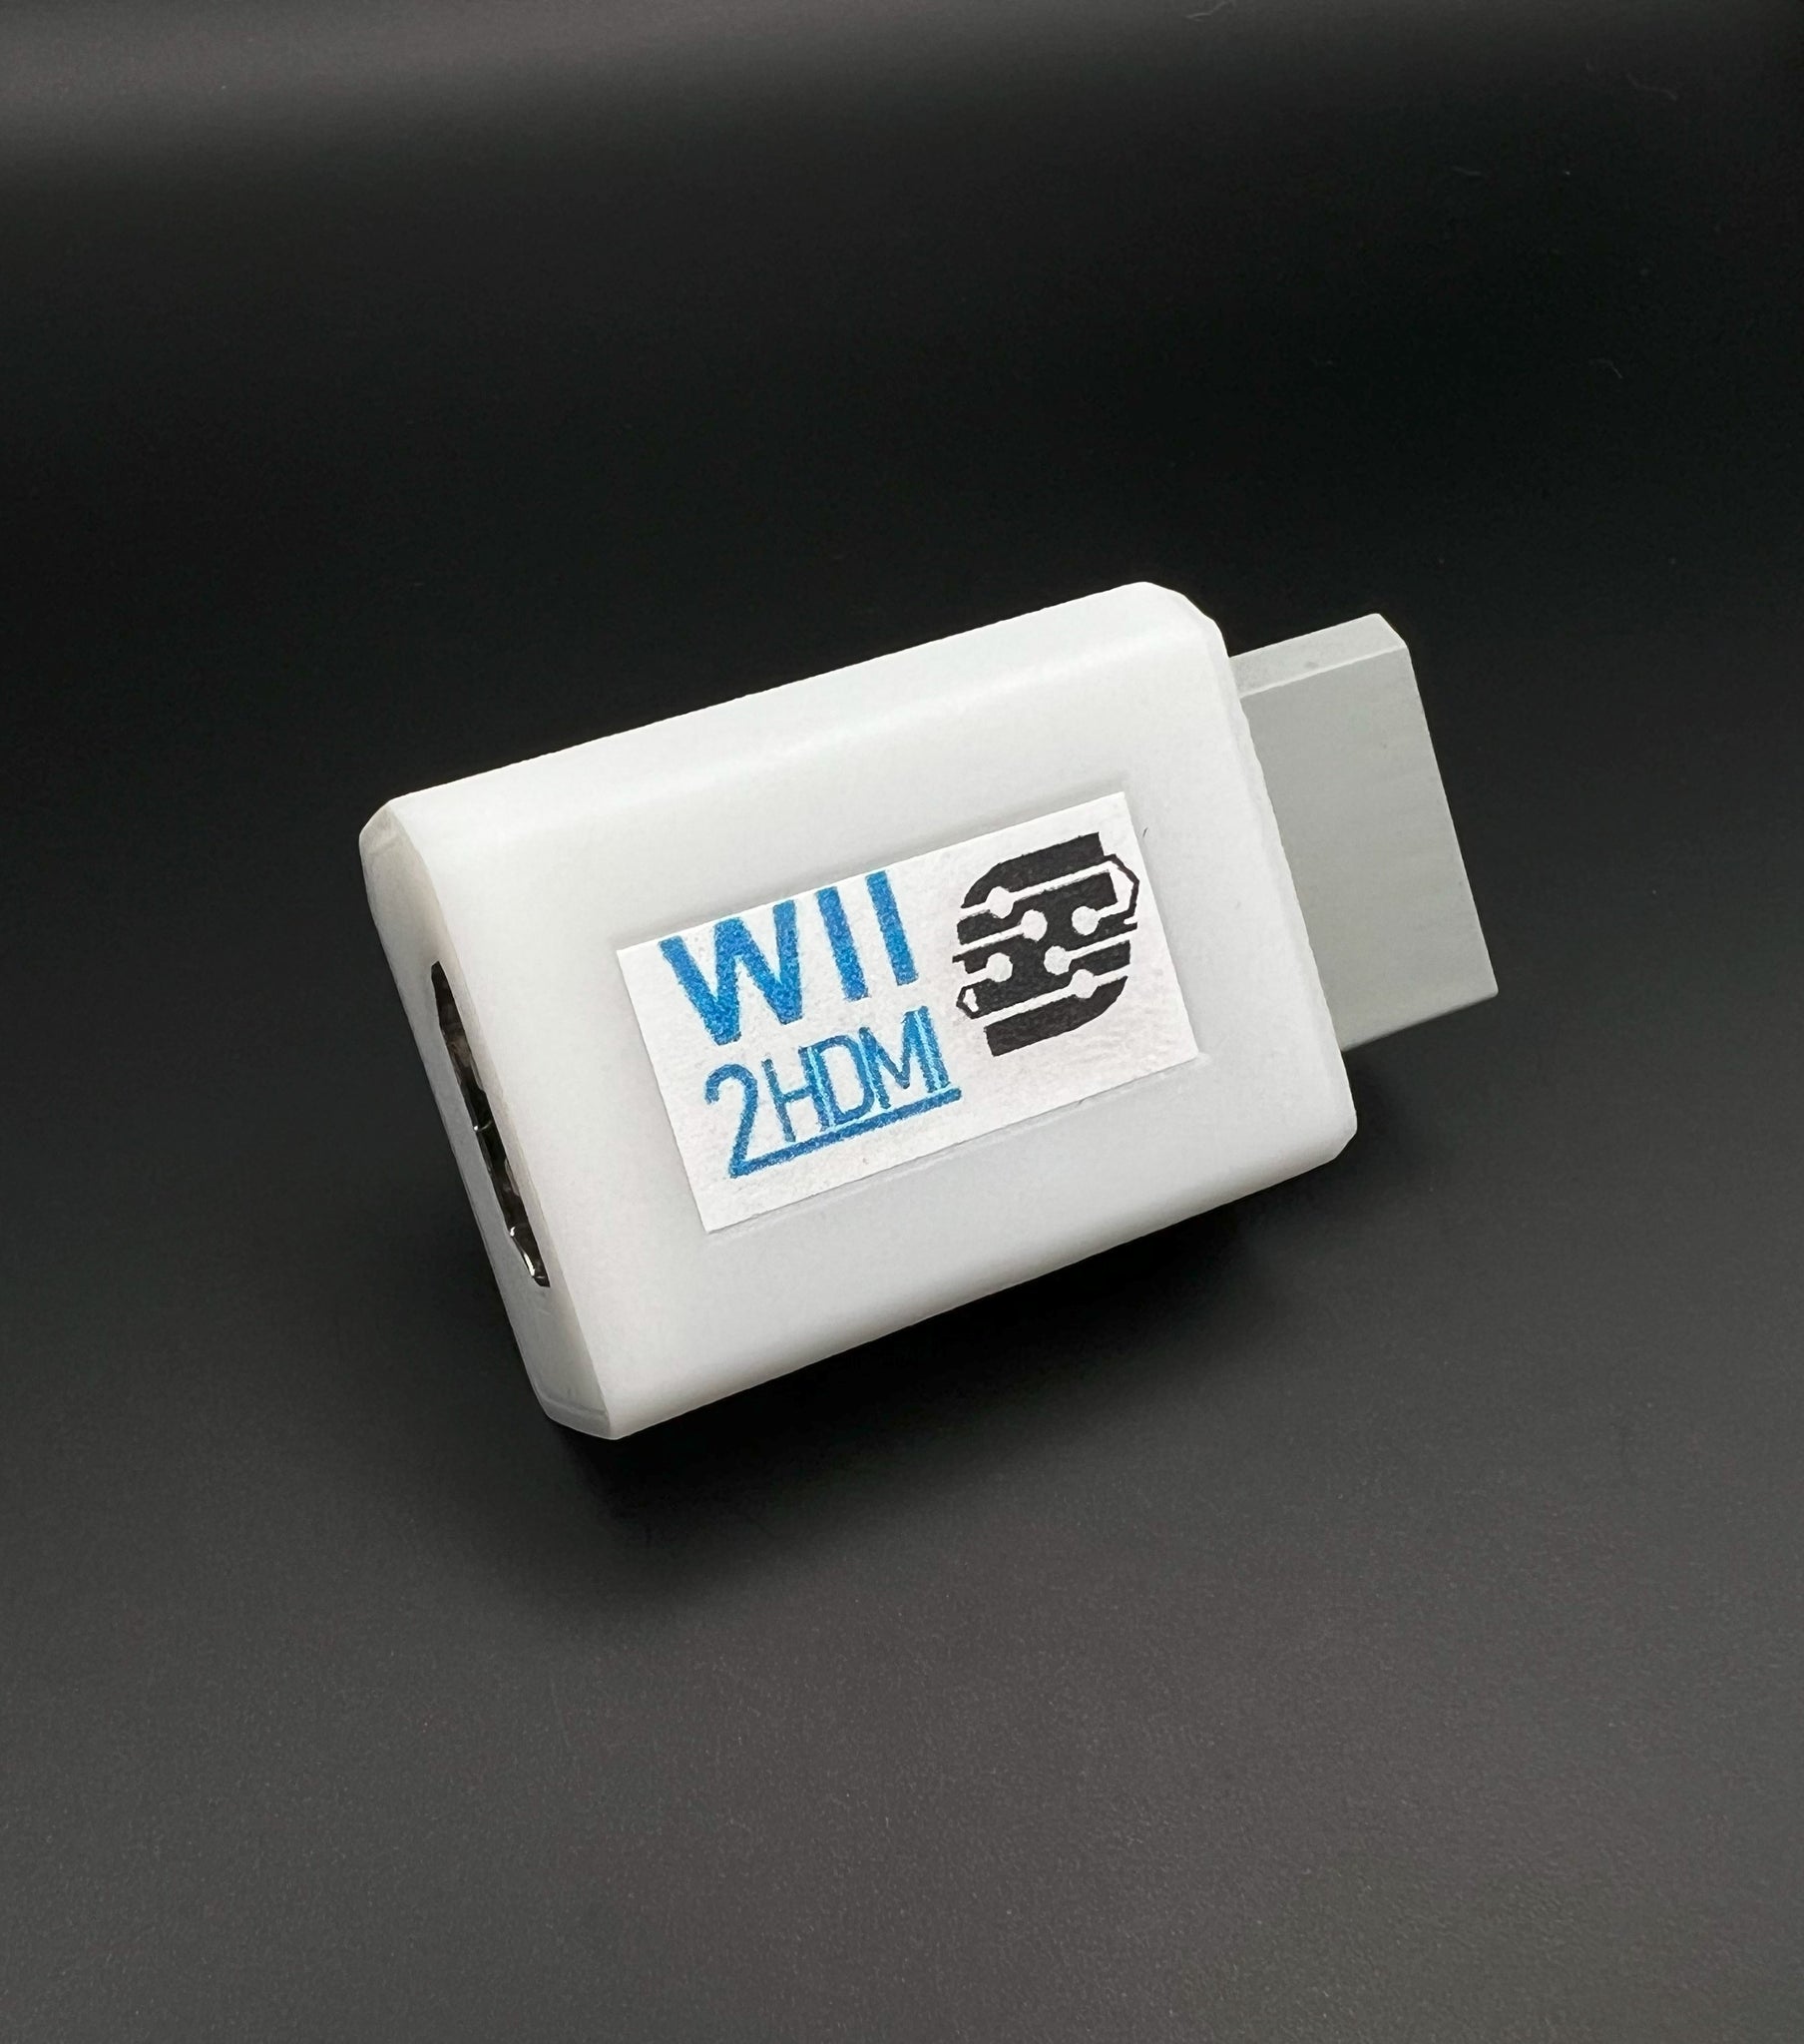 Plug and Play Wii to HDMI 1080p Convertisseur Adaptateur Wii 2